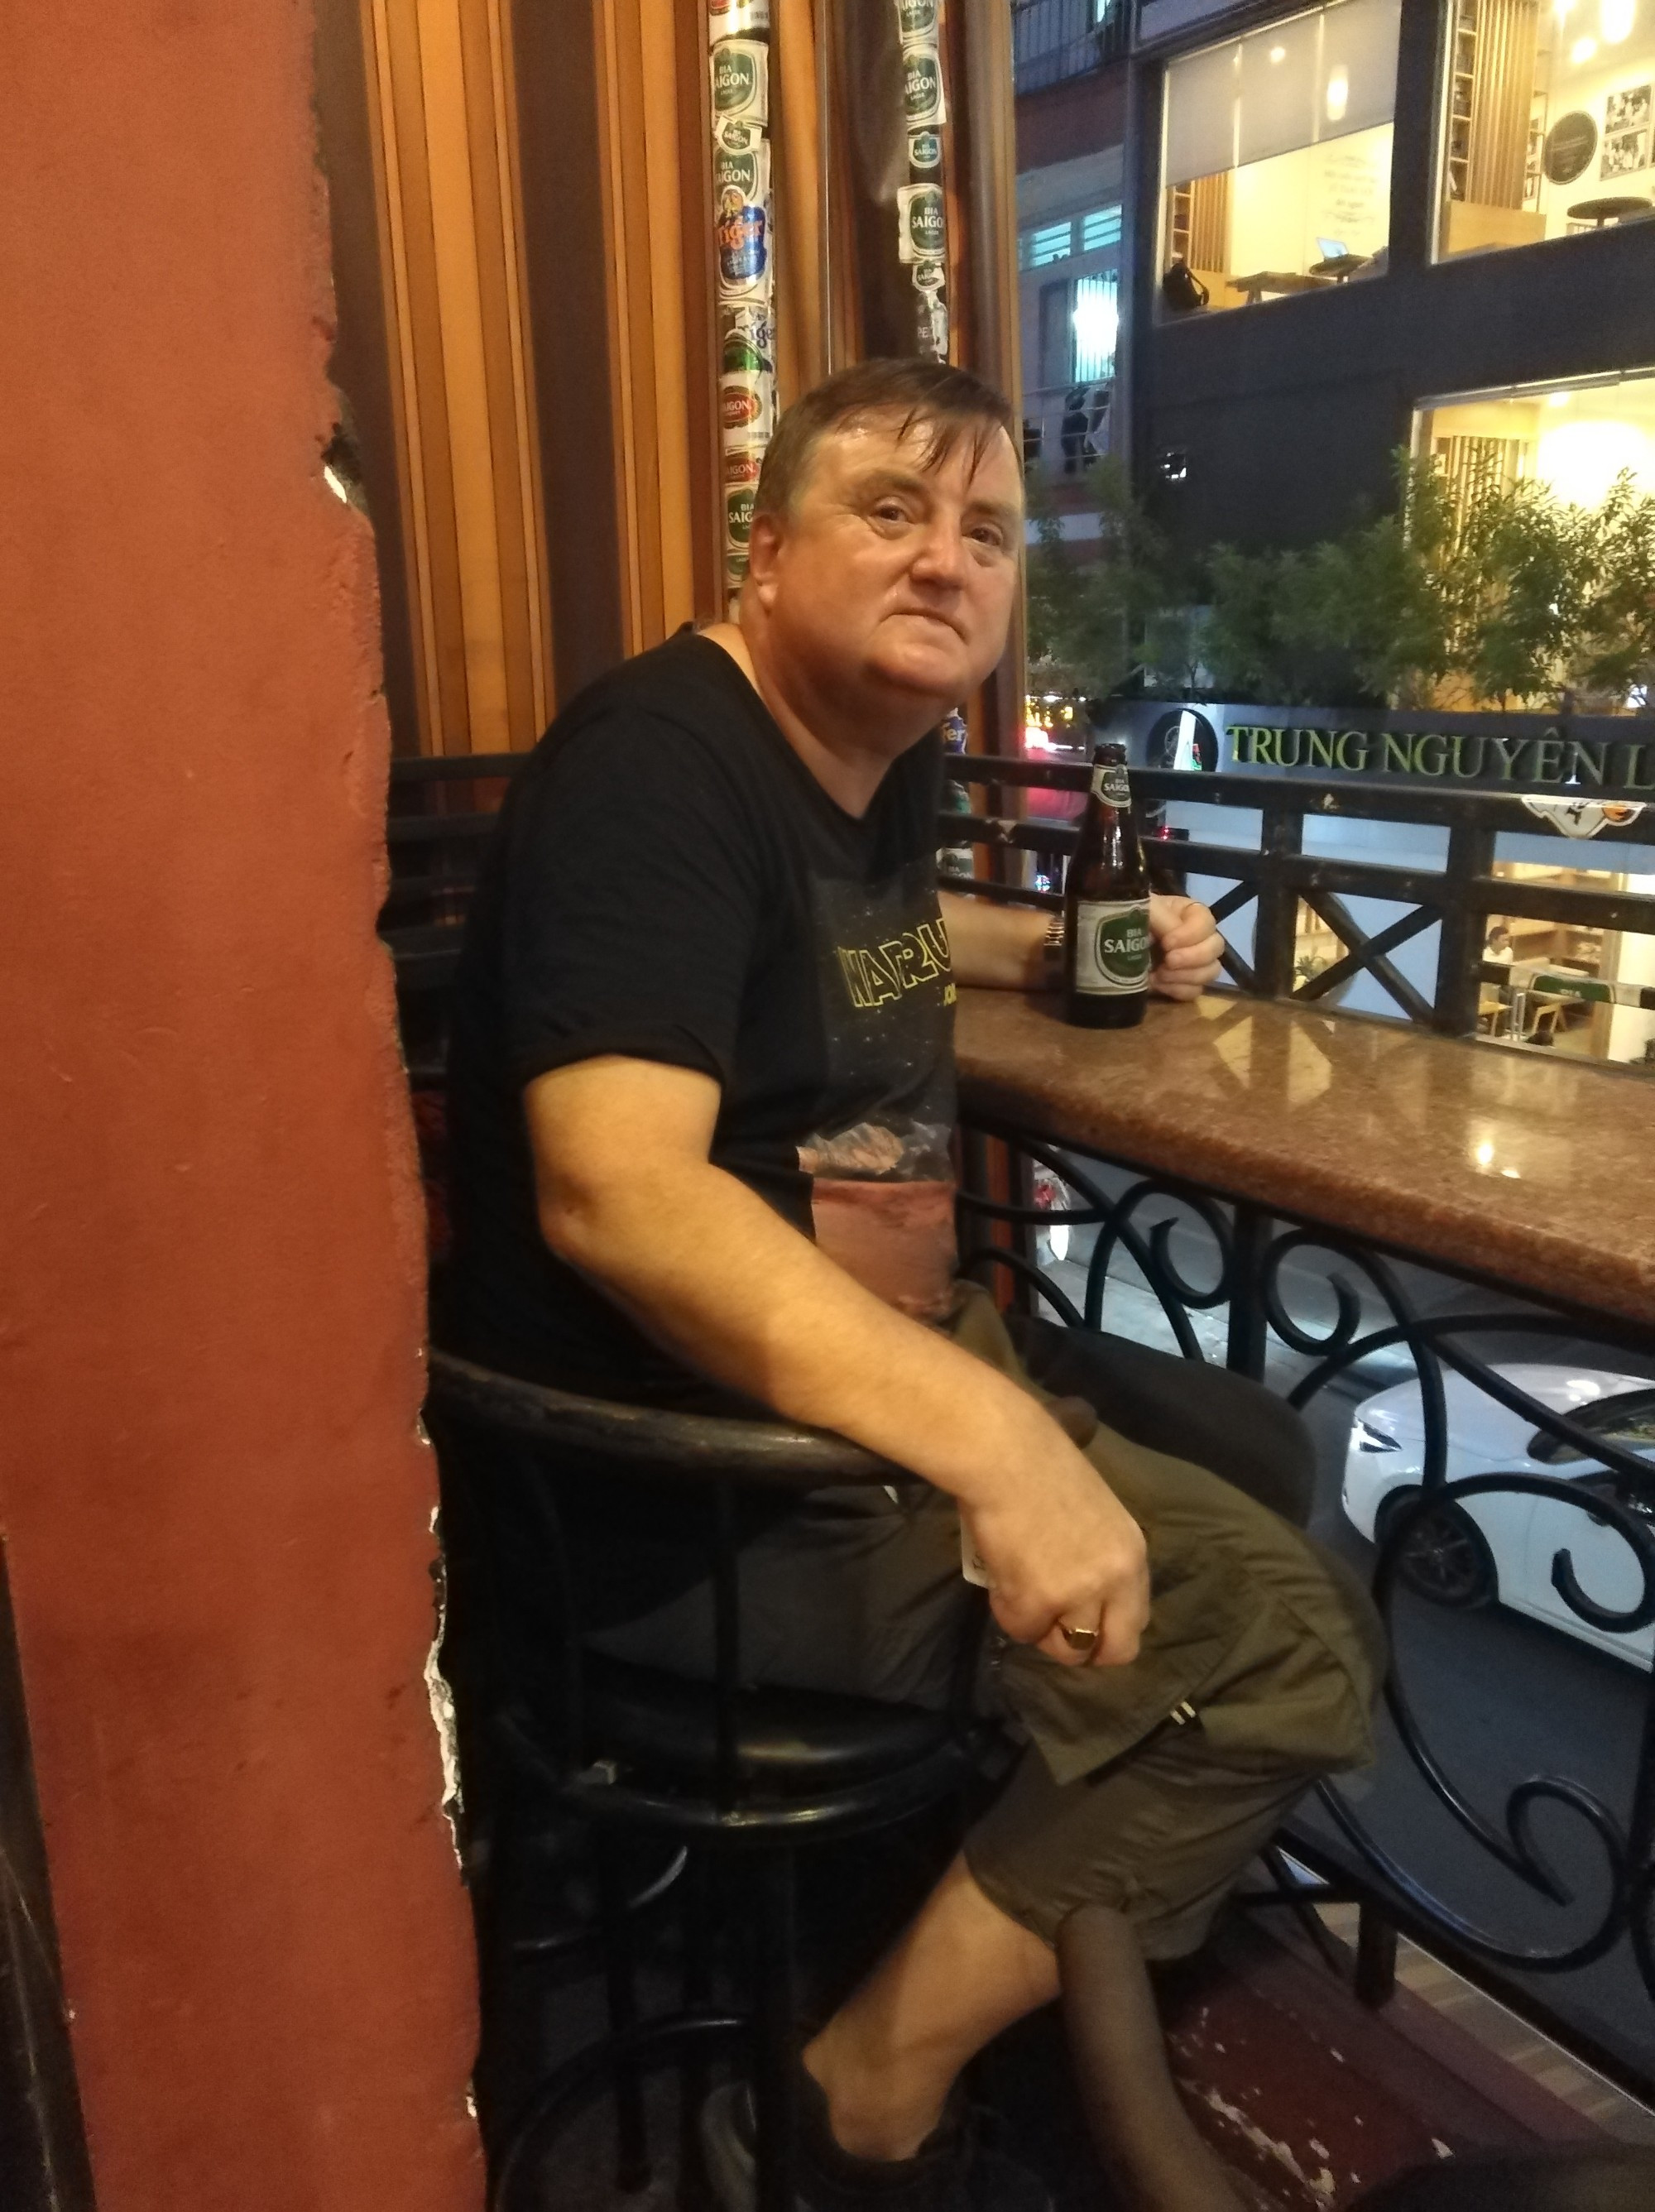 Having a drink and a bite to eat, Ho Chi Minh City, Vietnam 